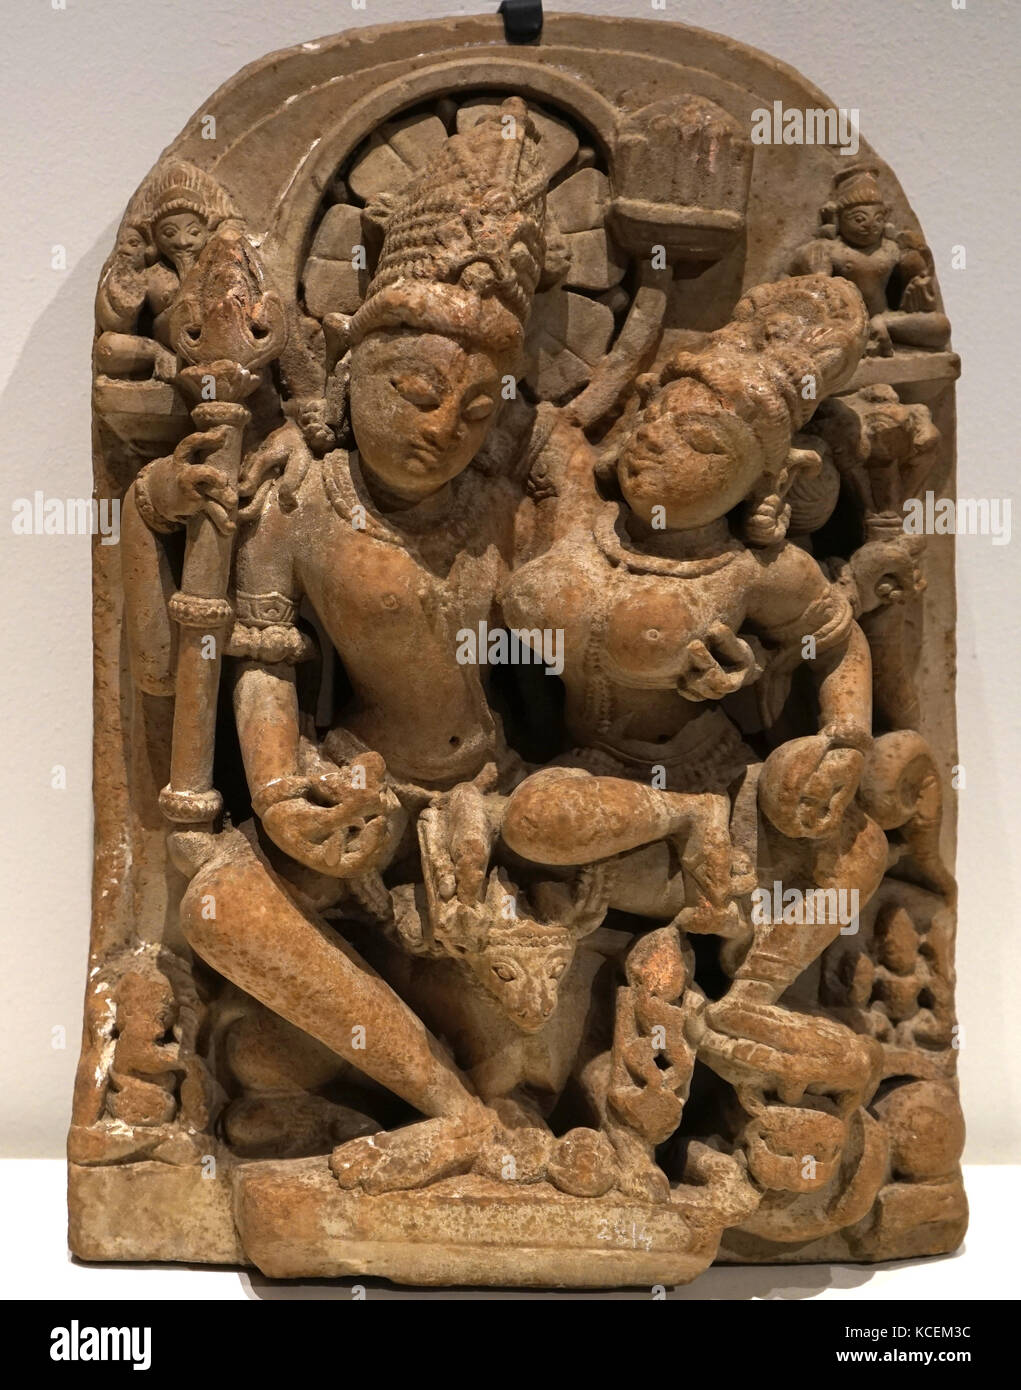 Statue depicting Shiva and Parvati. Shiva is known as the God of Creation, Destruction, Regeneration, Meditation, Arts, Yoga and Moksha. Parvati is known as the goddess of fertility, love and devotion; as well as of divine strength and power. Dated 12th Century Stock Photo